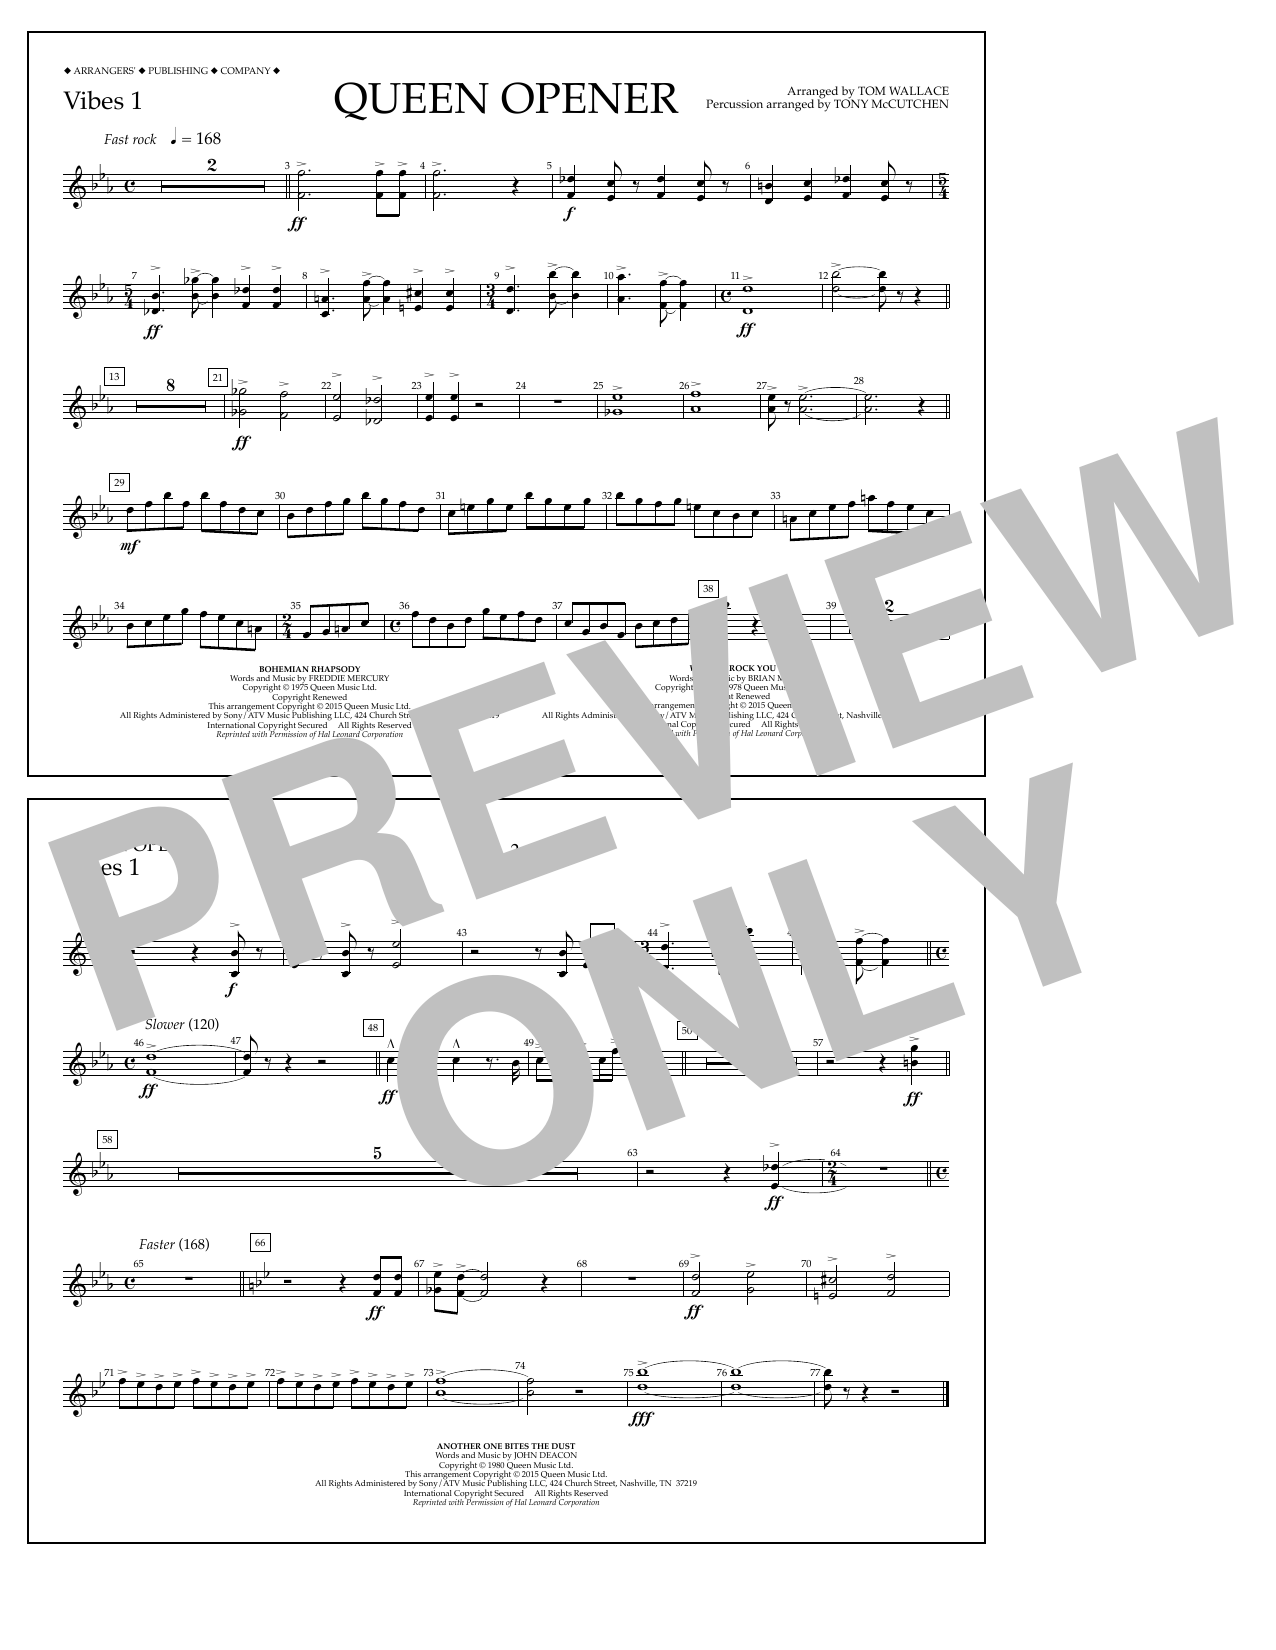 Download Tom Wallace Queen Opener - Vibes 1 Sheet Music